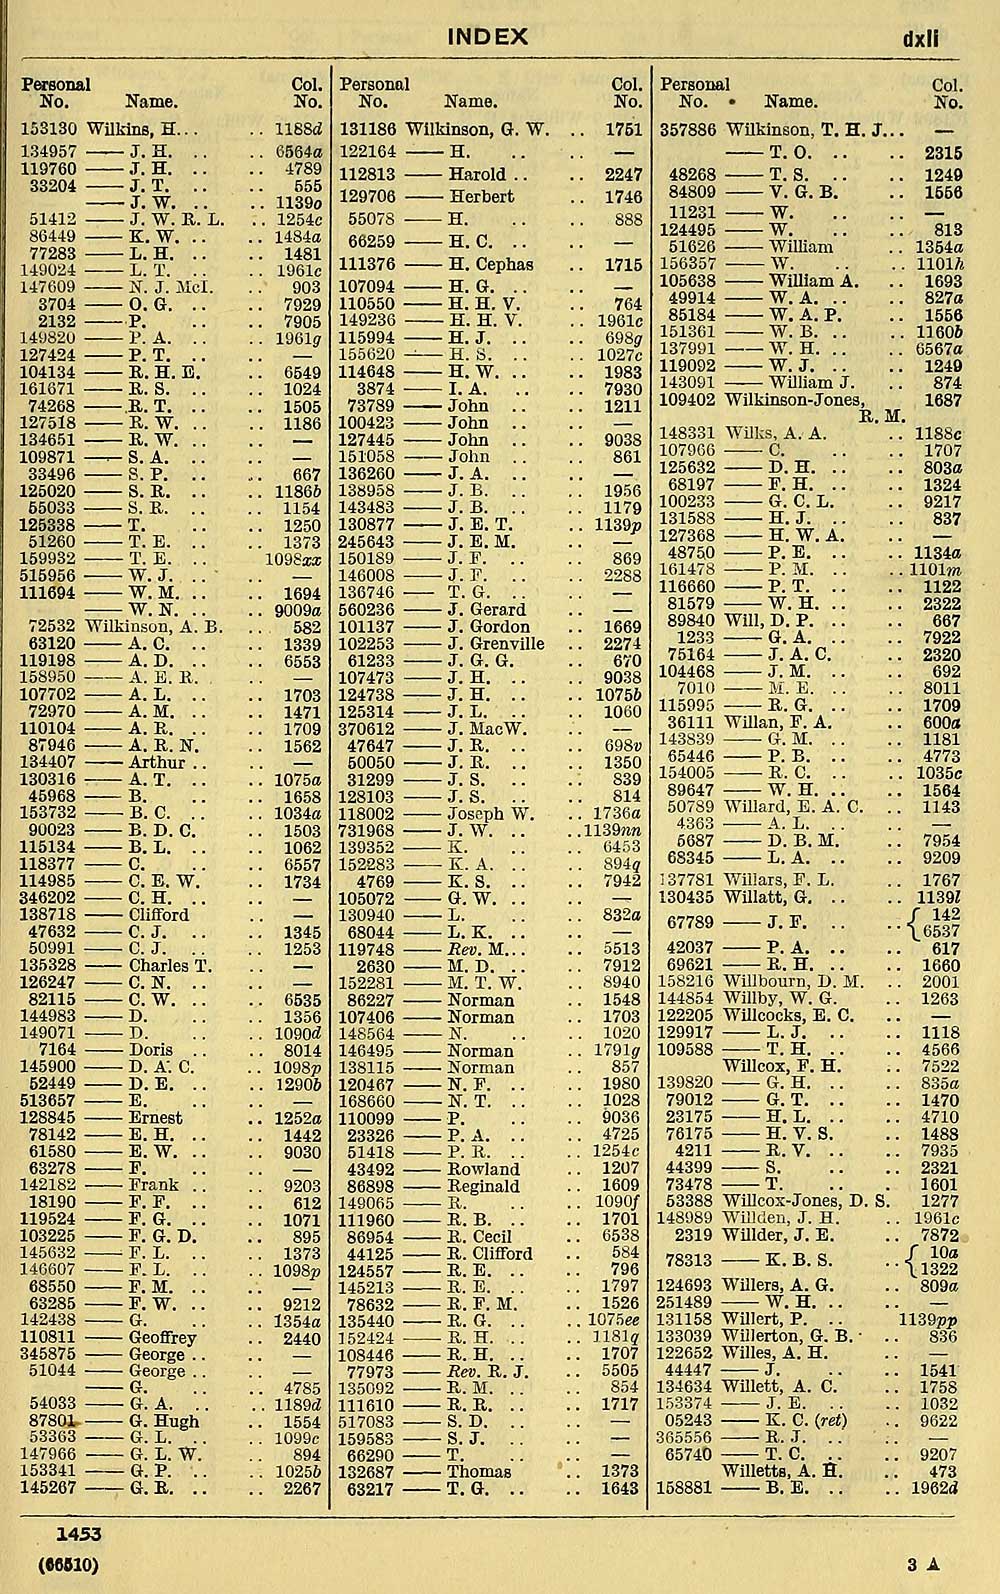 1459 Air Force Lists Air Force List Bimonthly 1944 March